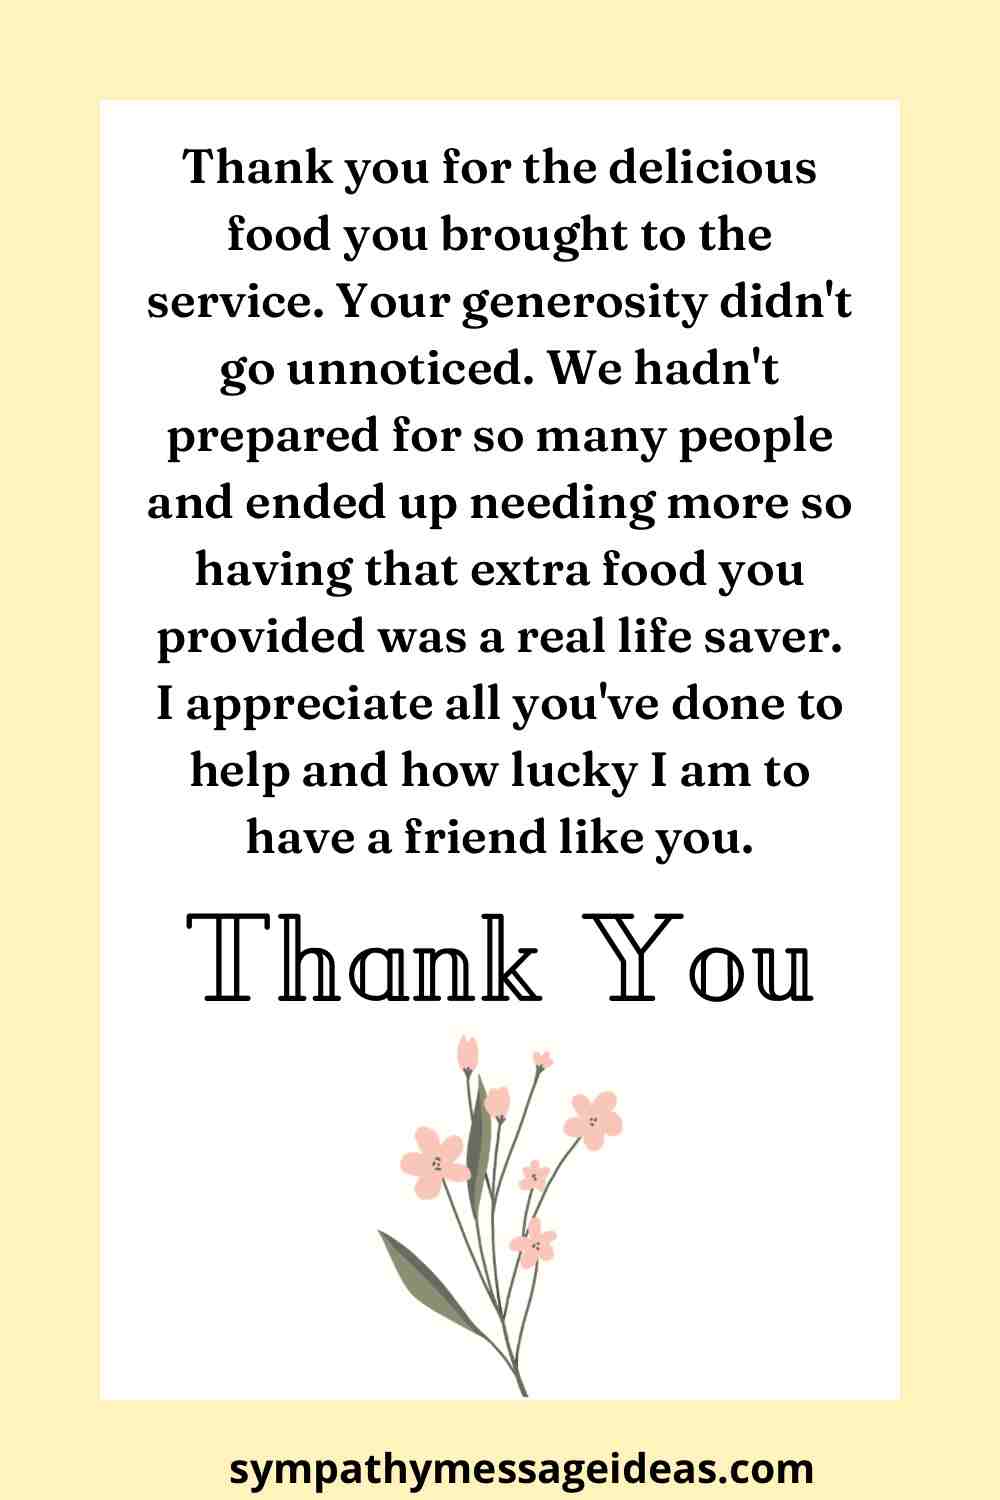 15 Example Thank You Notes for Funeral Food - Sympathy Message Ideas